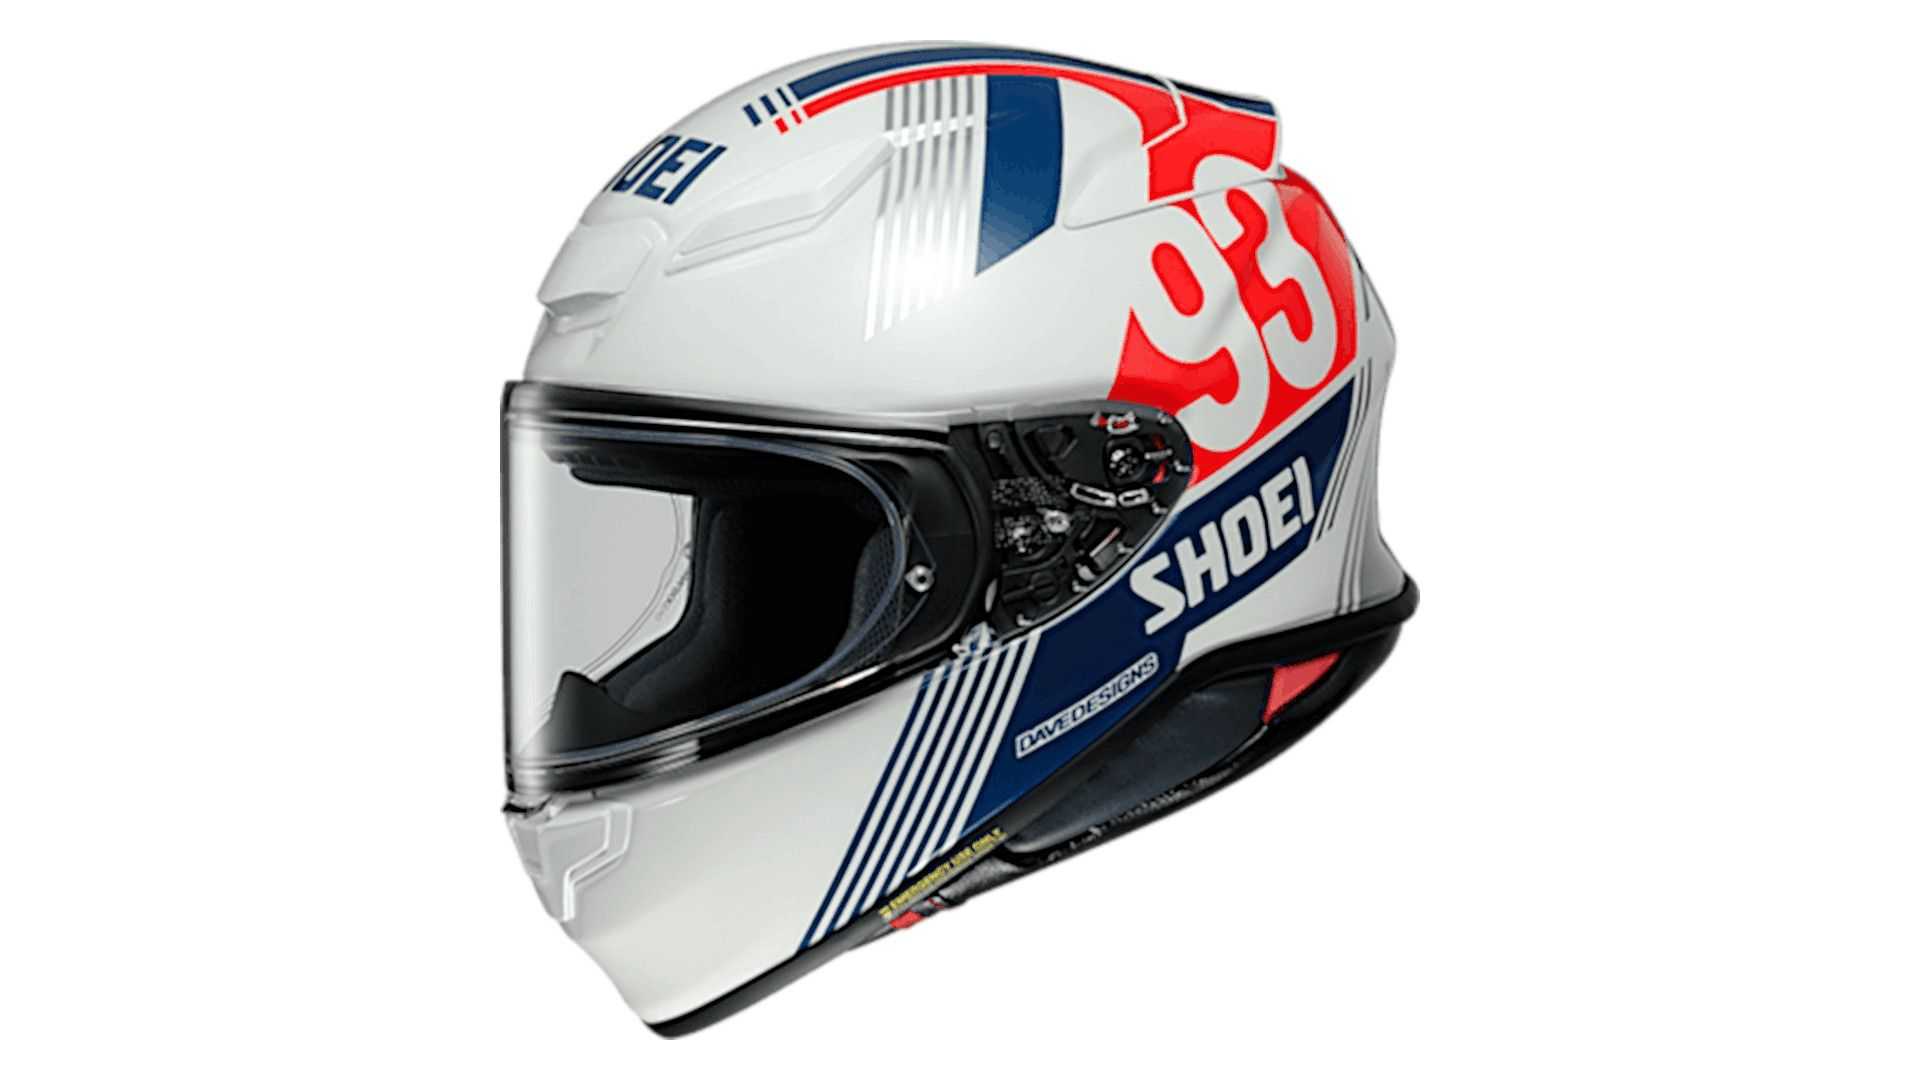 Shoei adds MM93 Retro designs to its Z-8 and Glamster lids 